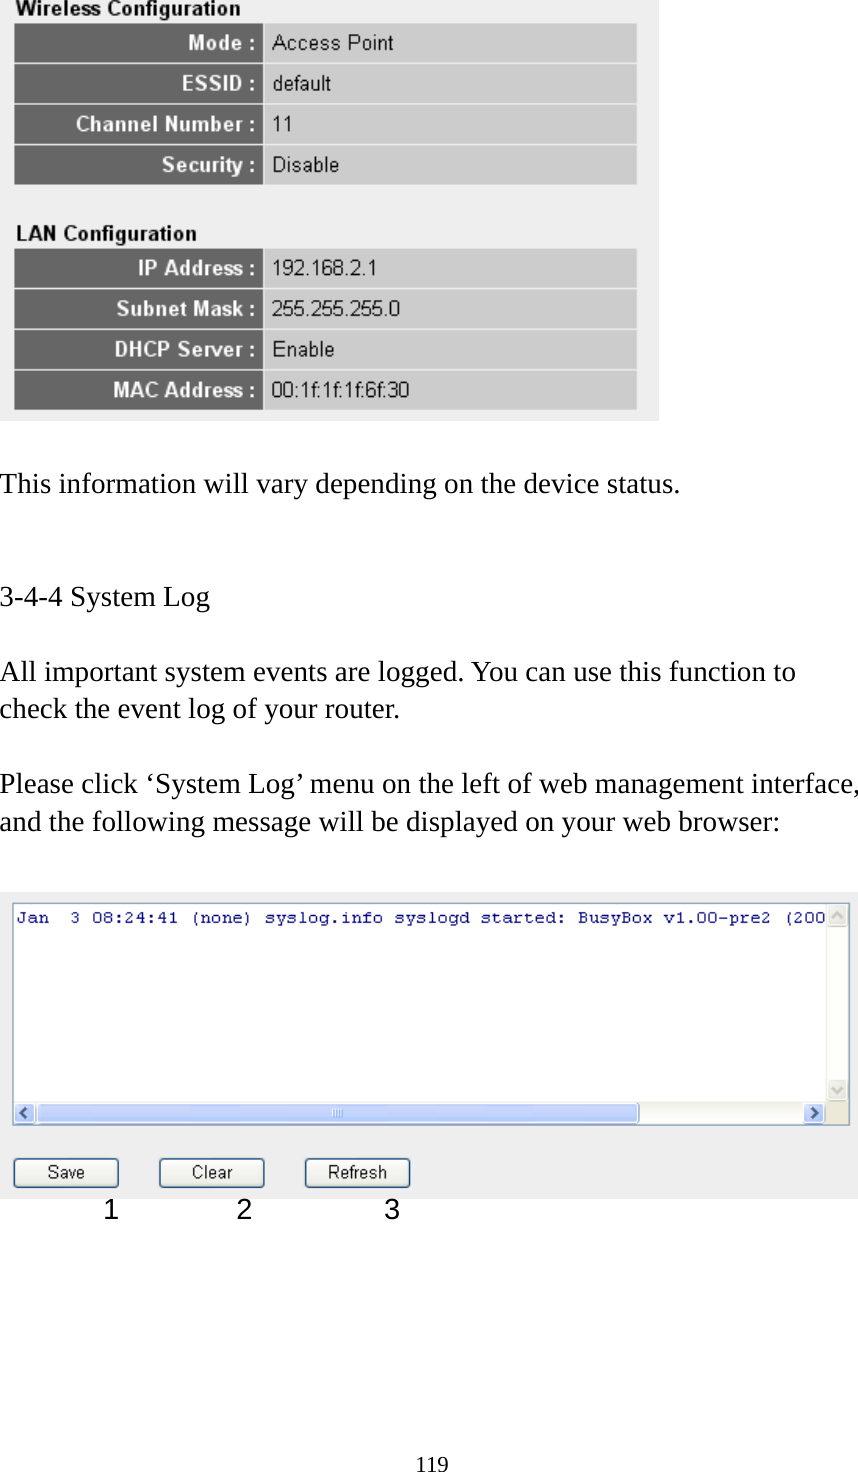 119   This information will vary depending on the device status.   3-4-4 System Log  All important system events are logged. You can use this function to check the event log of your router.  Please click ‘System Log’ menu on the left of web management interface, and the following message will be displayed on your web browser:        1 2  3